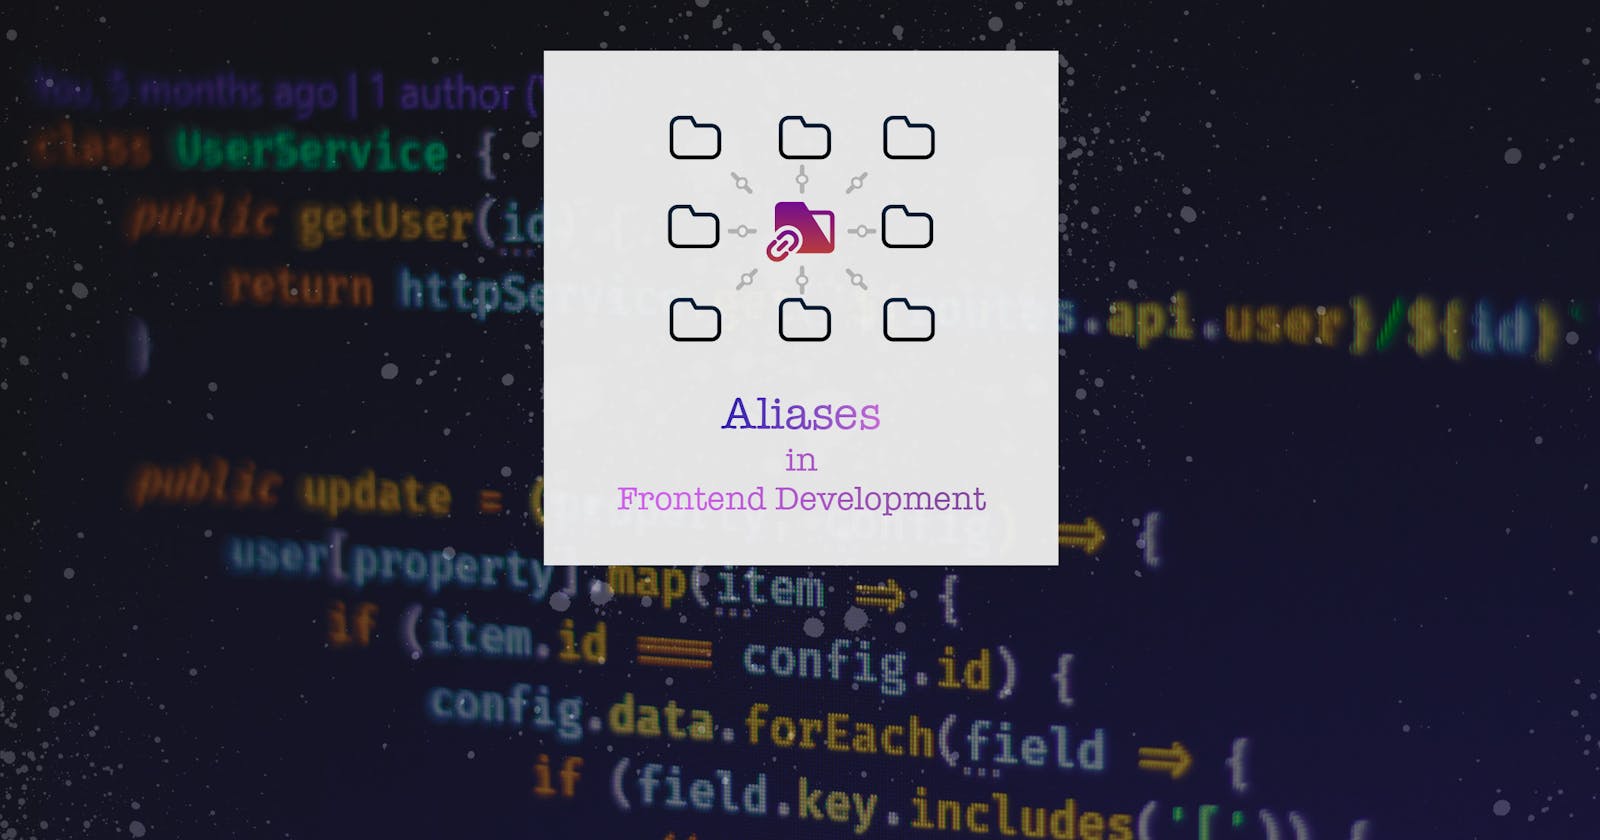 Now you can manage Aliases for FrontEnd Workflow at one place